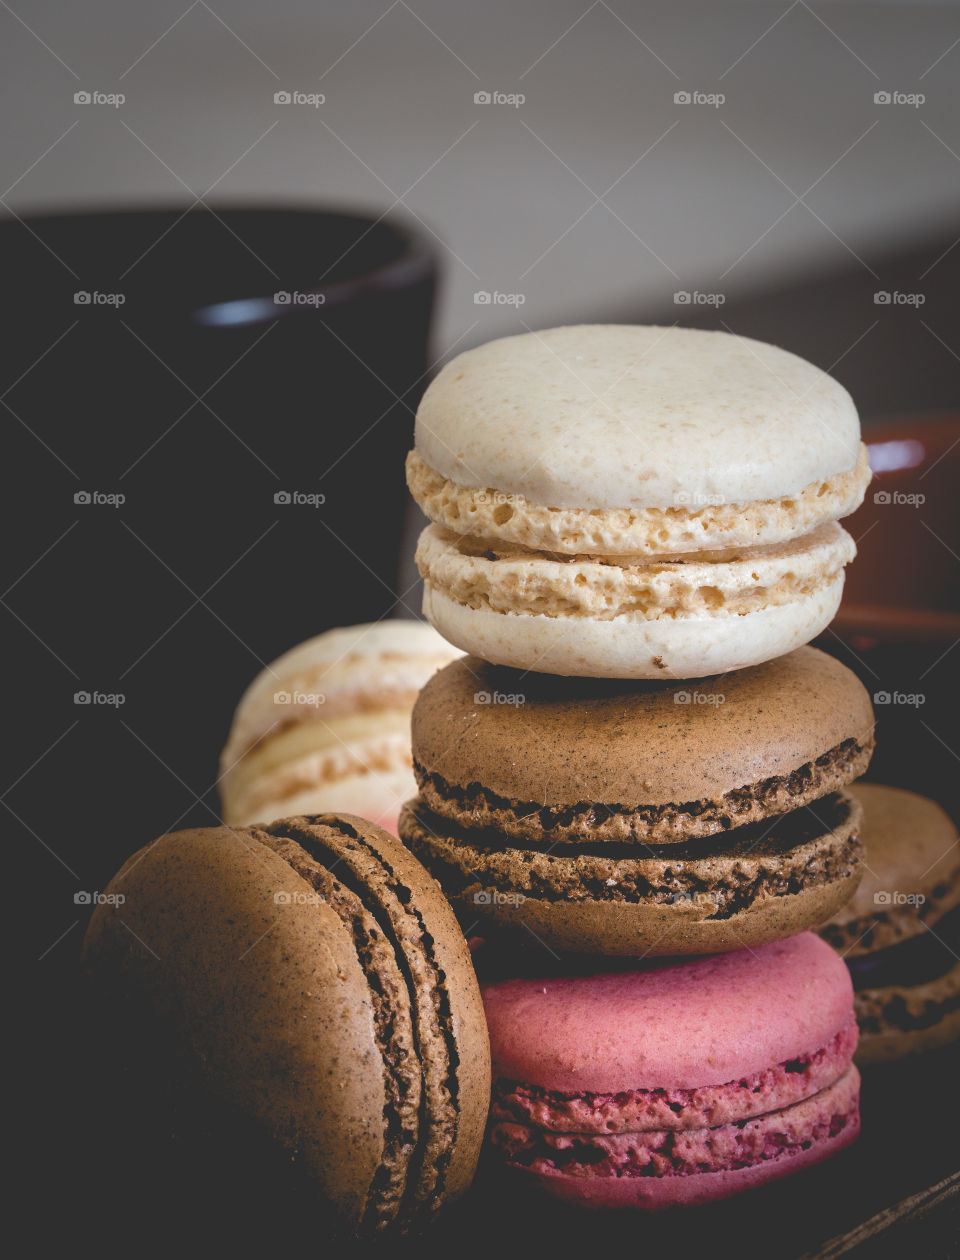 A stack of delicious macaroons or macarons for a sweet treat during a coffee break